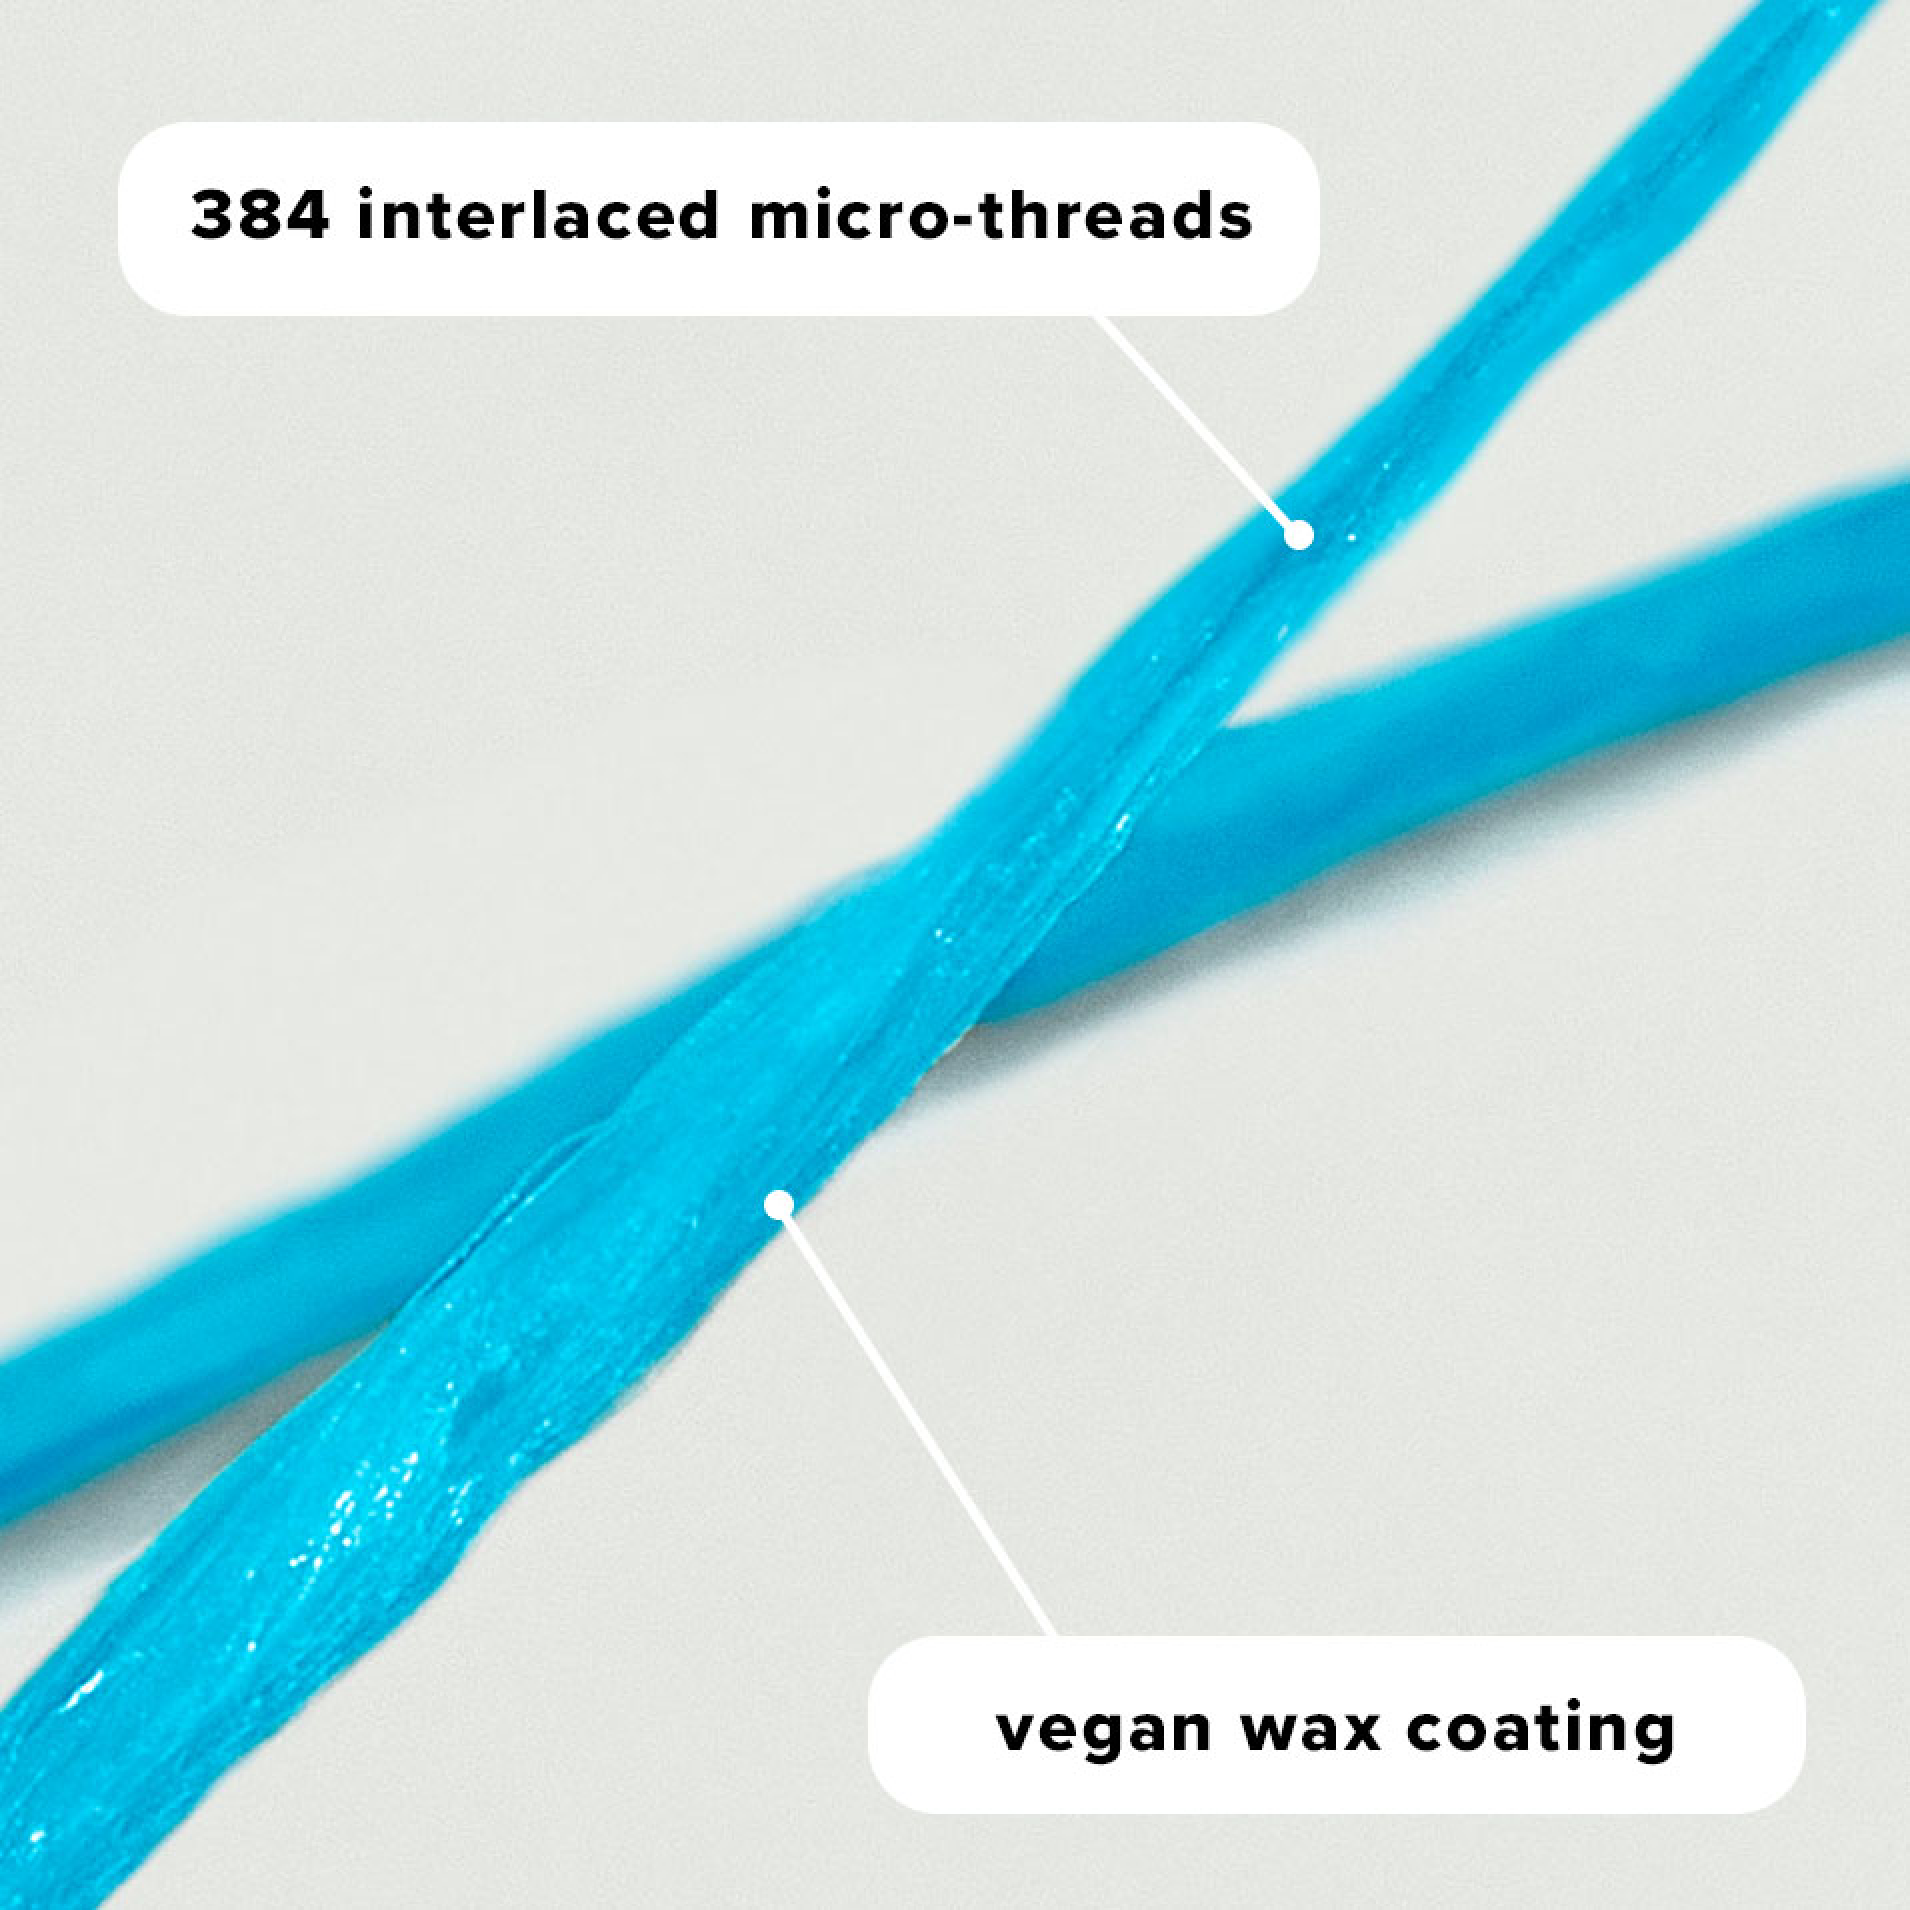 A light blue string of the Reach POP Mint Dental Floss on a light grey surface zoomed in to show the micro-threads, and black text over it "384 interlaced micro-threads" and "vegan wax coating"